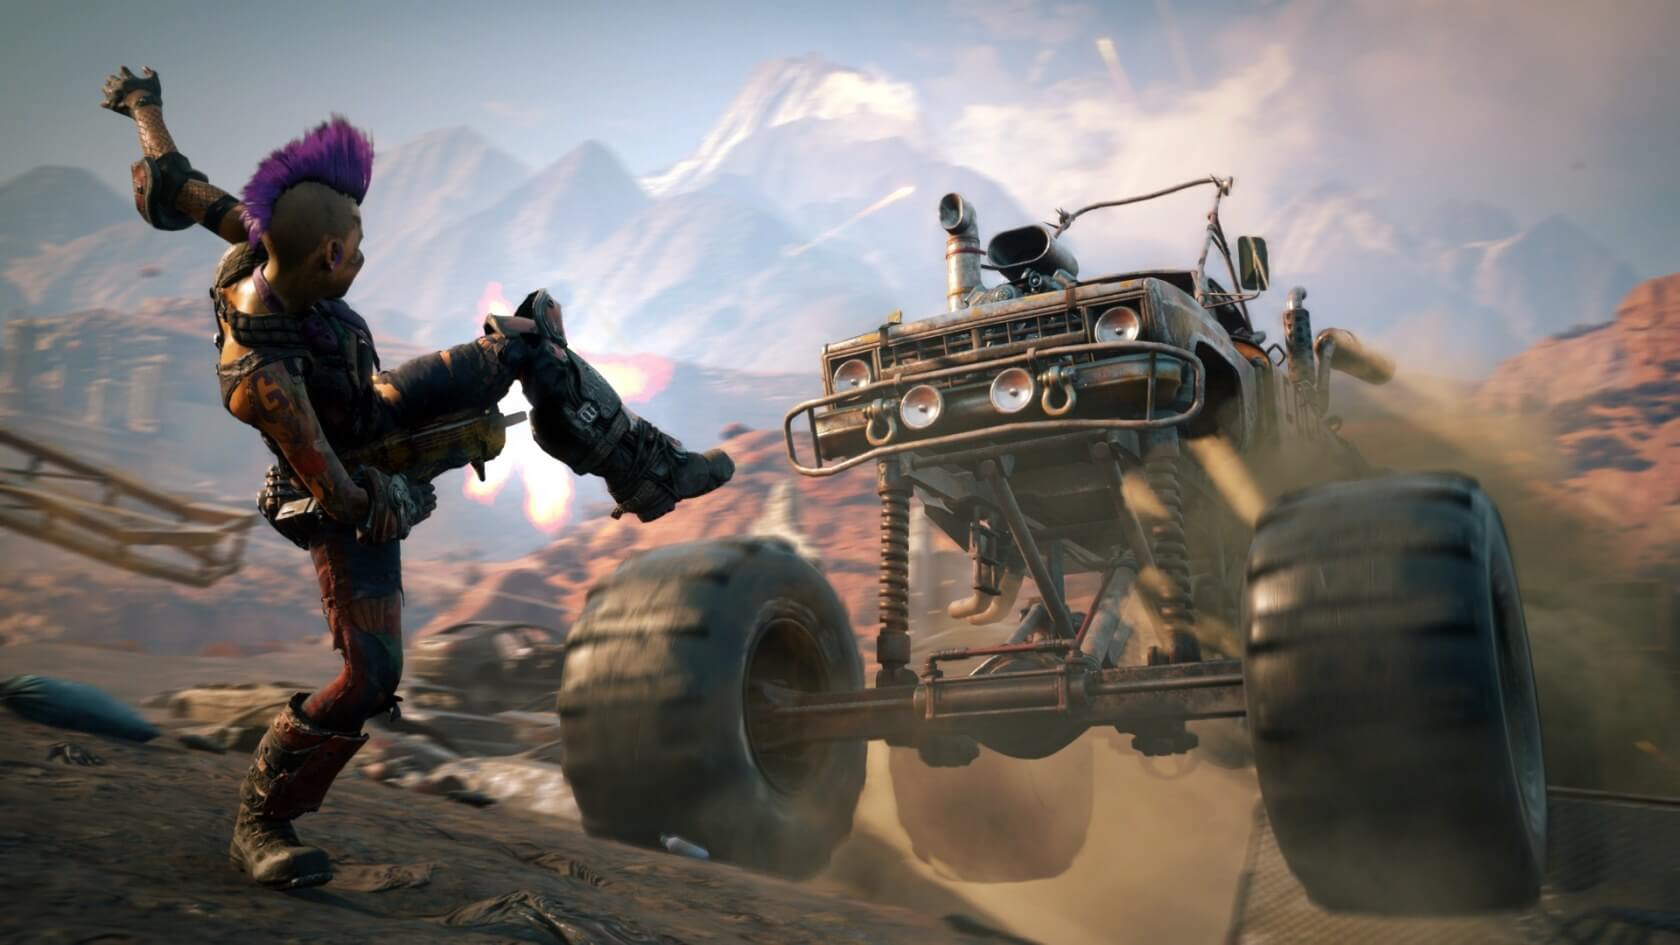 Bethesda might not sell Rage 2 on Steam